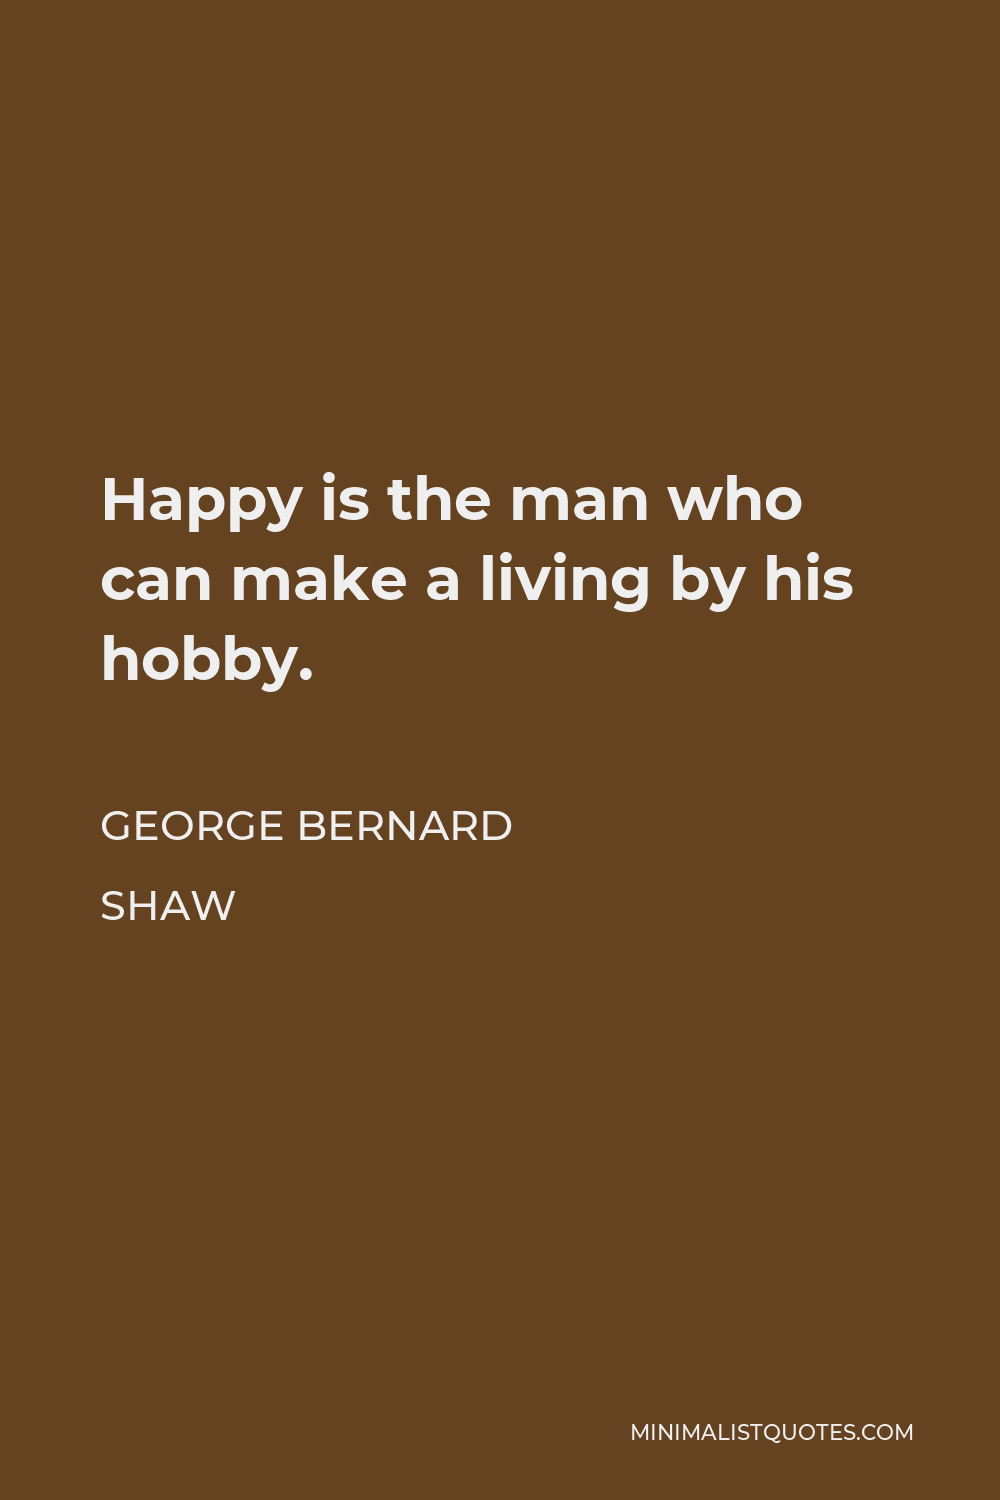 George Bernard Shaw Quote - Happy is the man who can make a living by his hobby.